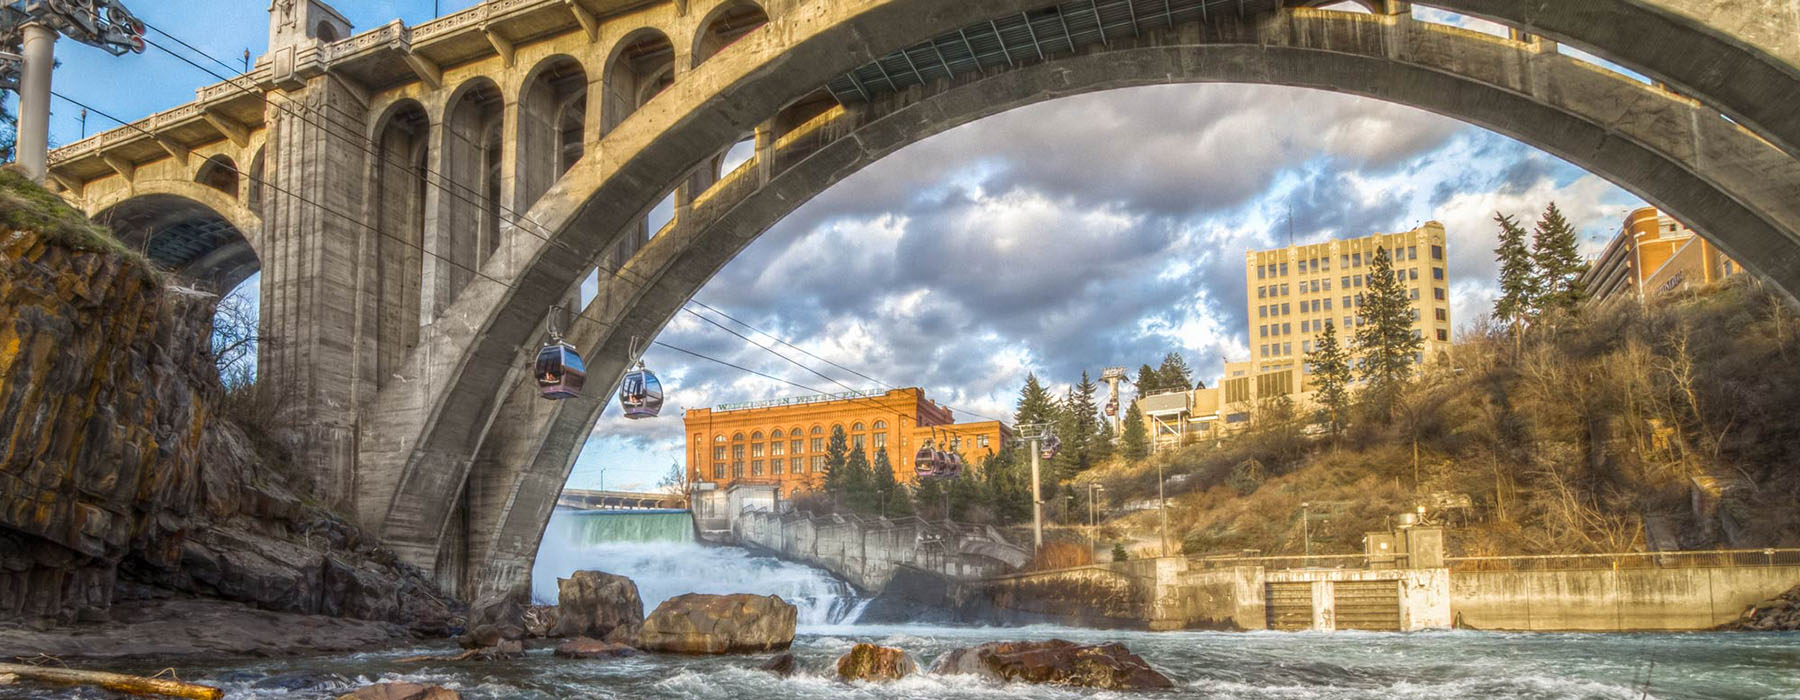 The Monroe bridge over the Spokane river and gondolas with the city skyline in the background.